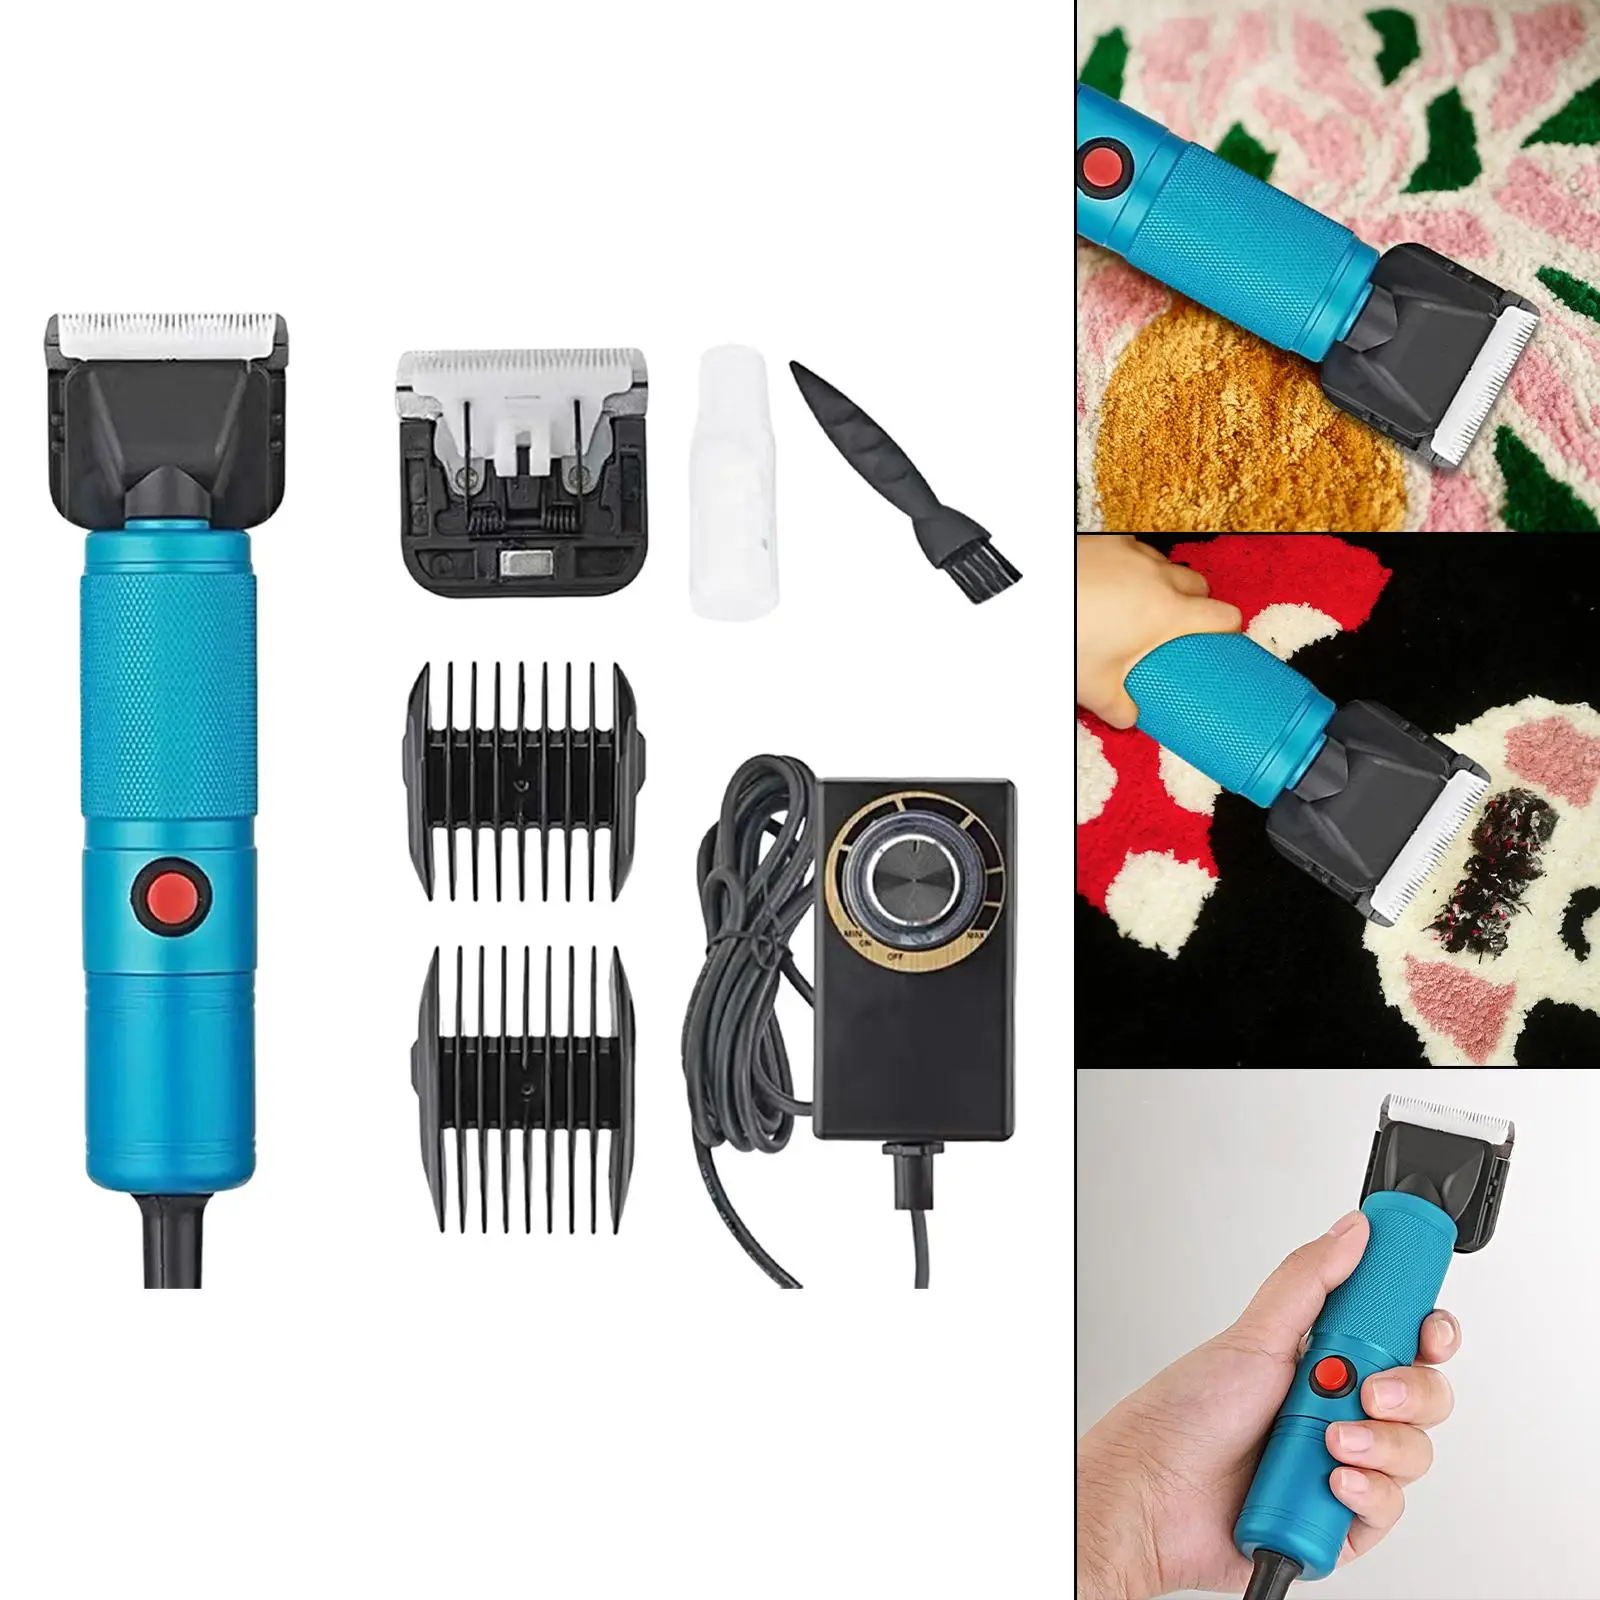 280W Electric Carpet Trimmer 5 Speed High Efficiency Portable Carving Tool Low Noise Rug Carver for Sheep Shears Horse Goats Rug